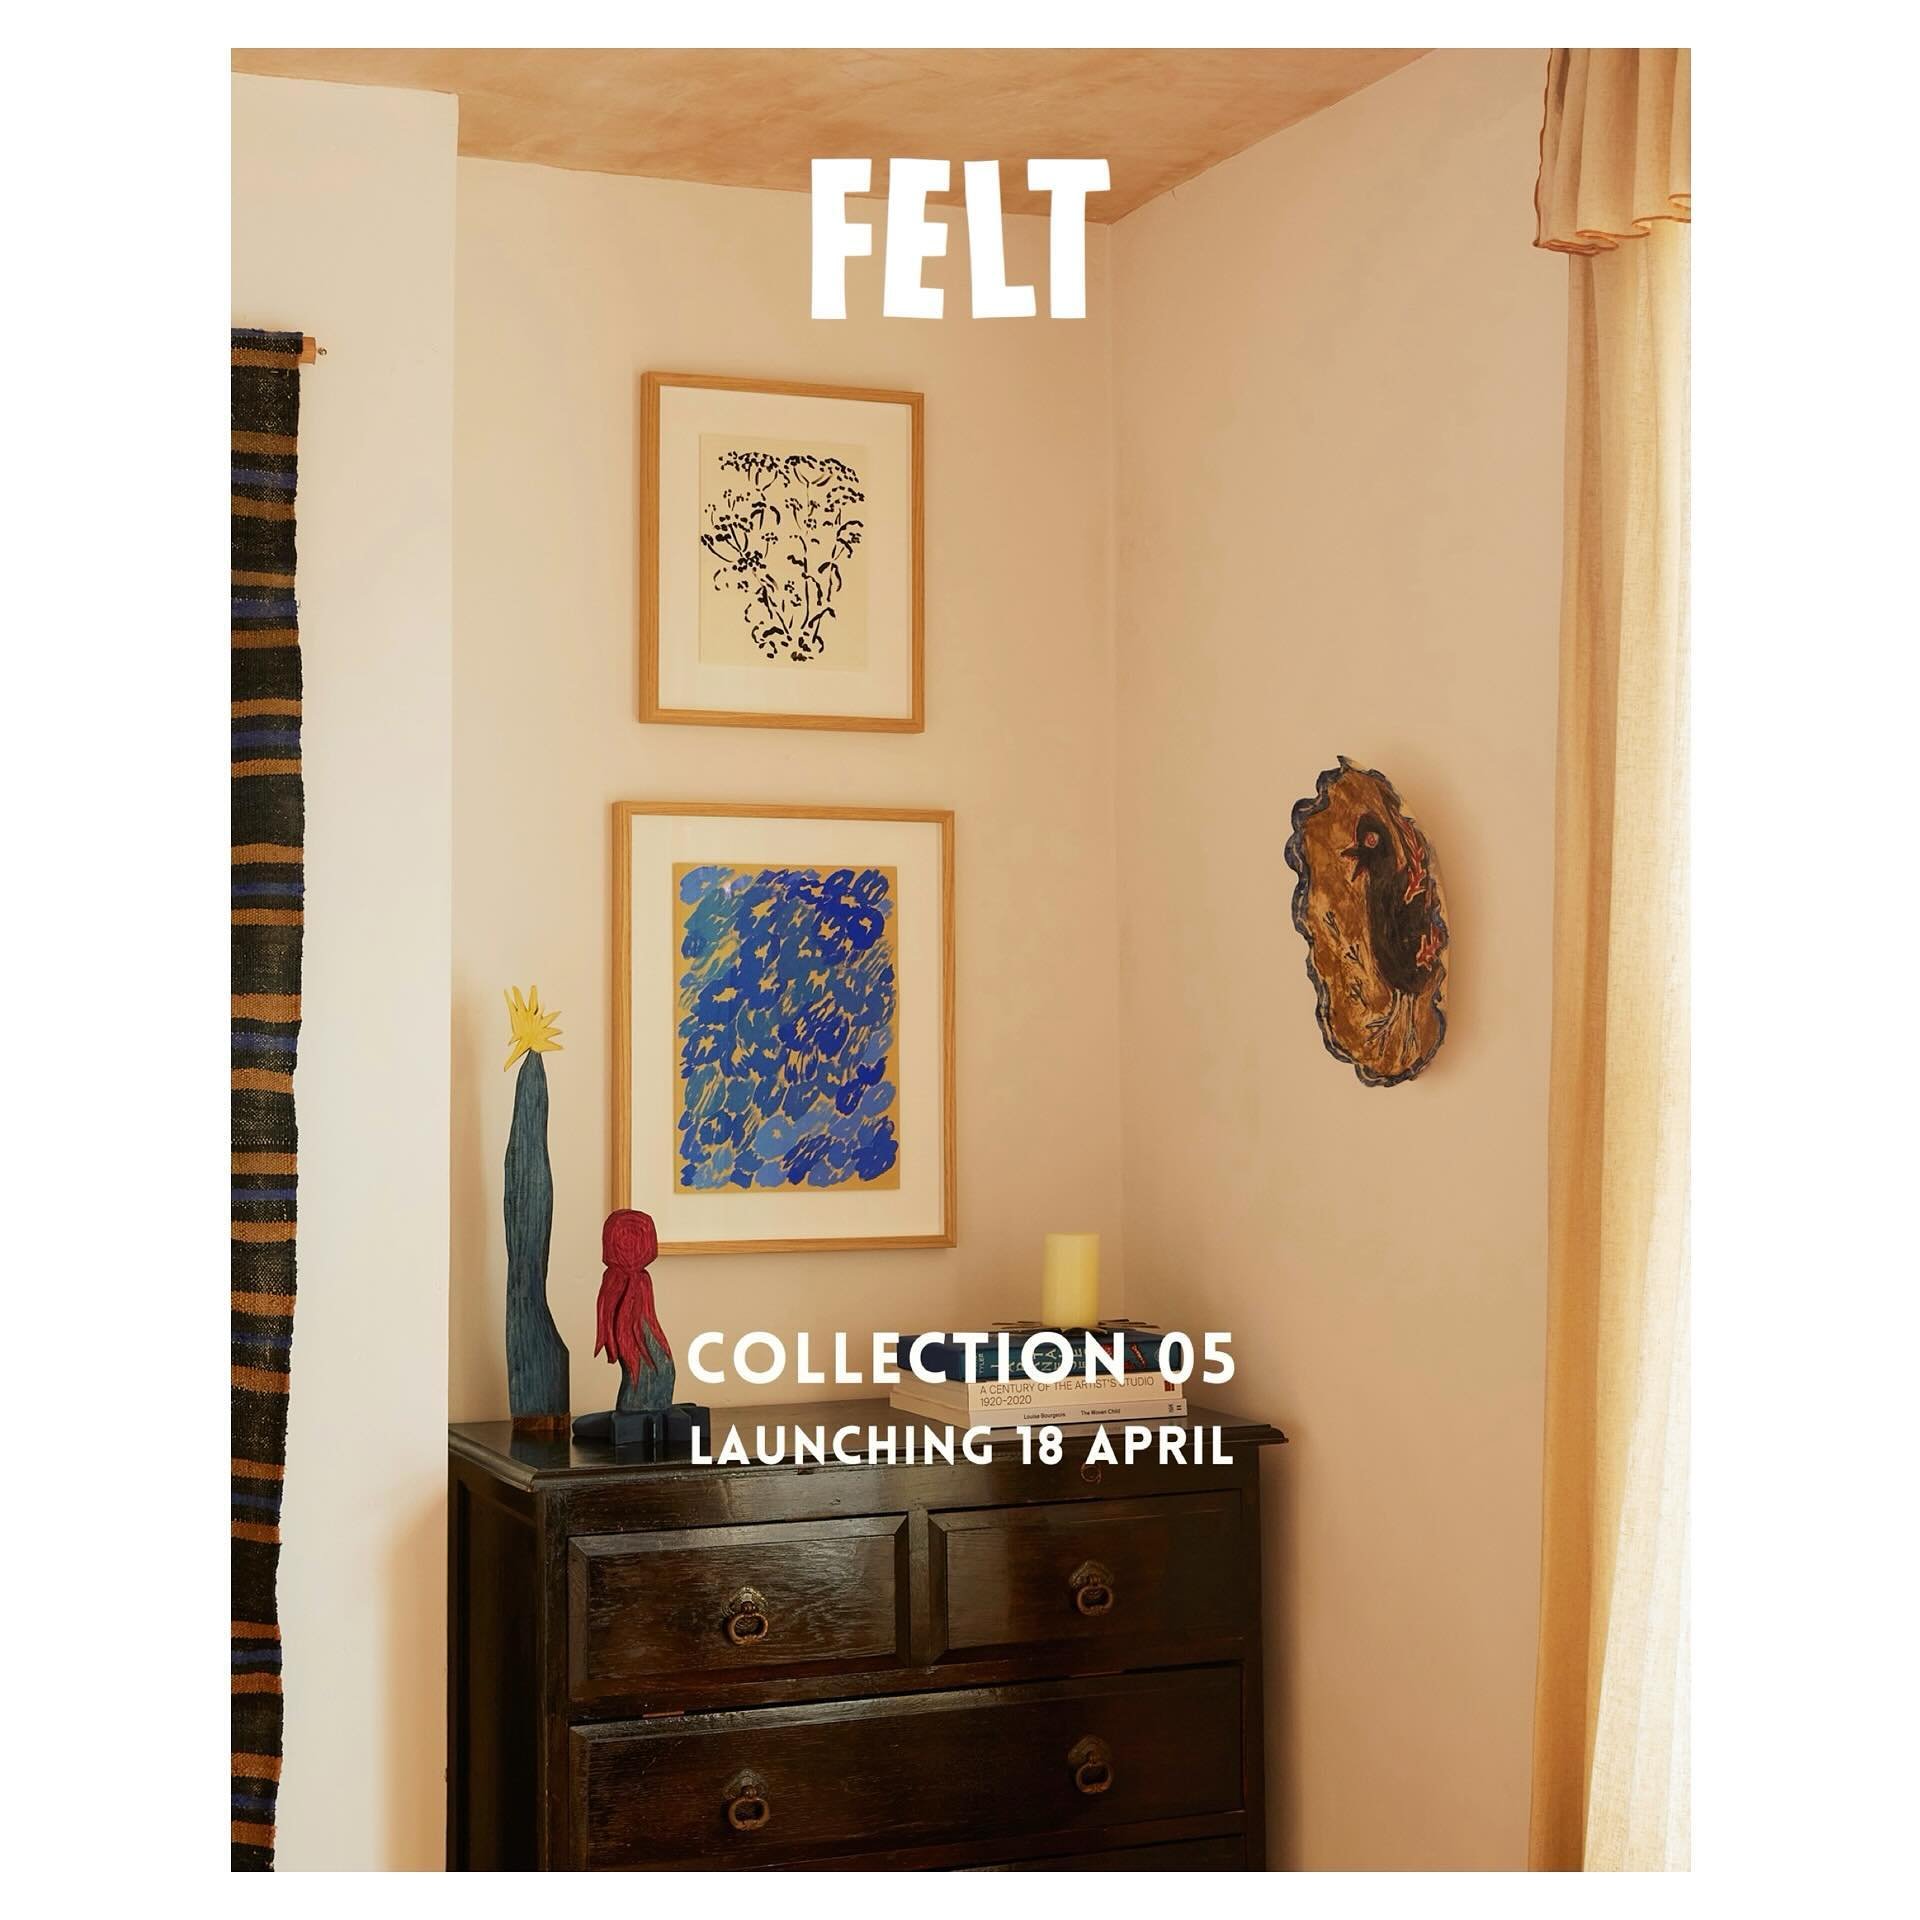 〰️ tomorrow 〰️ works on paper with FELT collection 05 〰️ @felt.collections 〰️